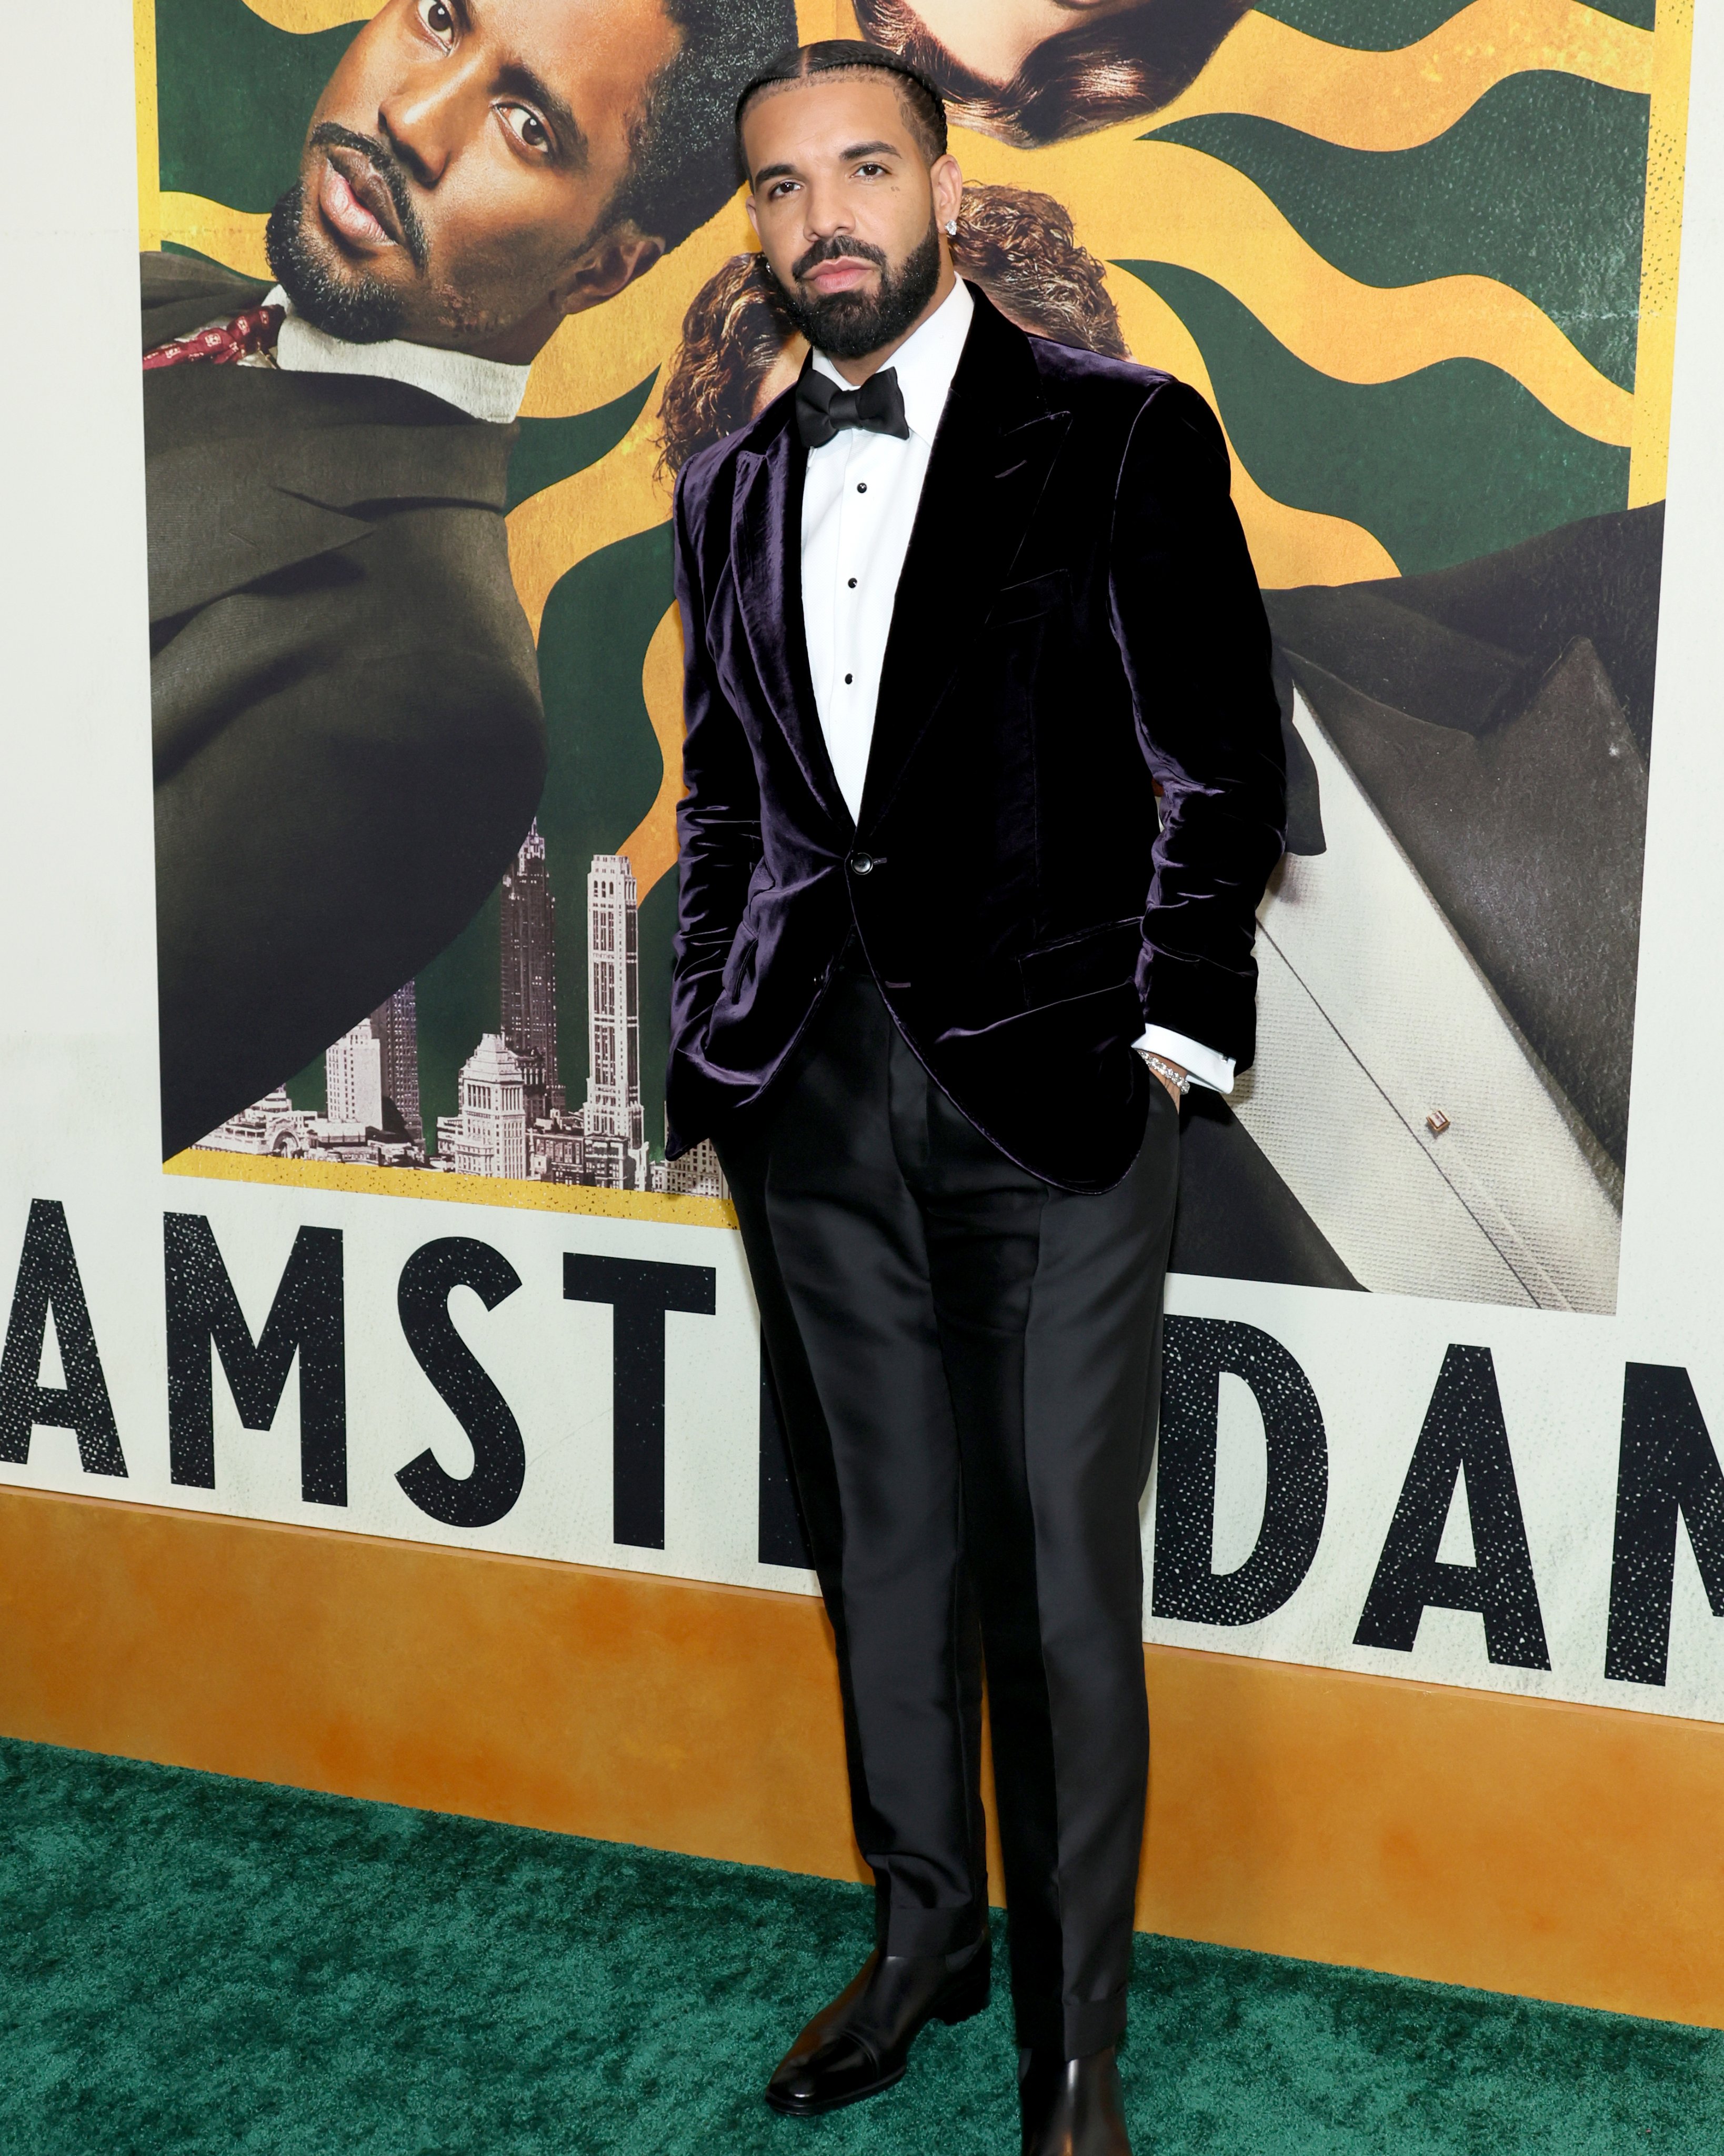 TOM FORD on Twitter: #TOMFORD TO THE WORLD PREMIERE OF #AMSTERDAMMOVIE IN NEW YORK. #TOMFORD https://t.co/aCvGJHpquY" Twitter